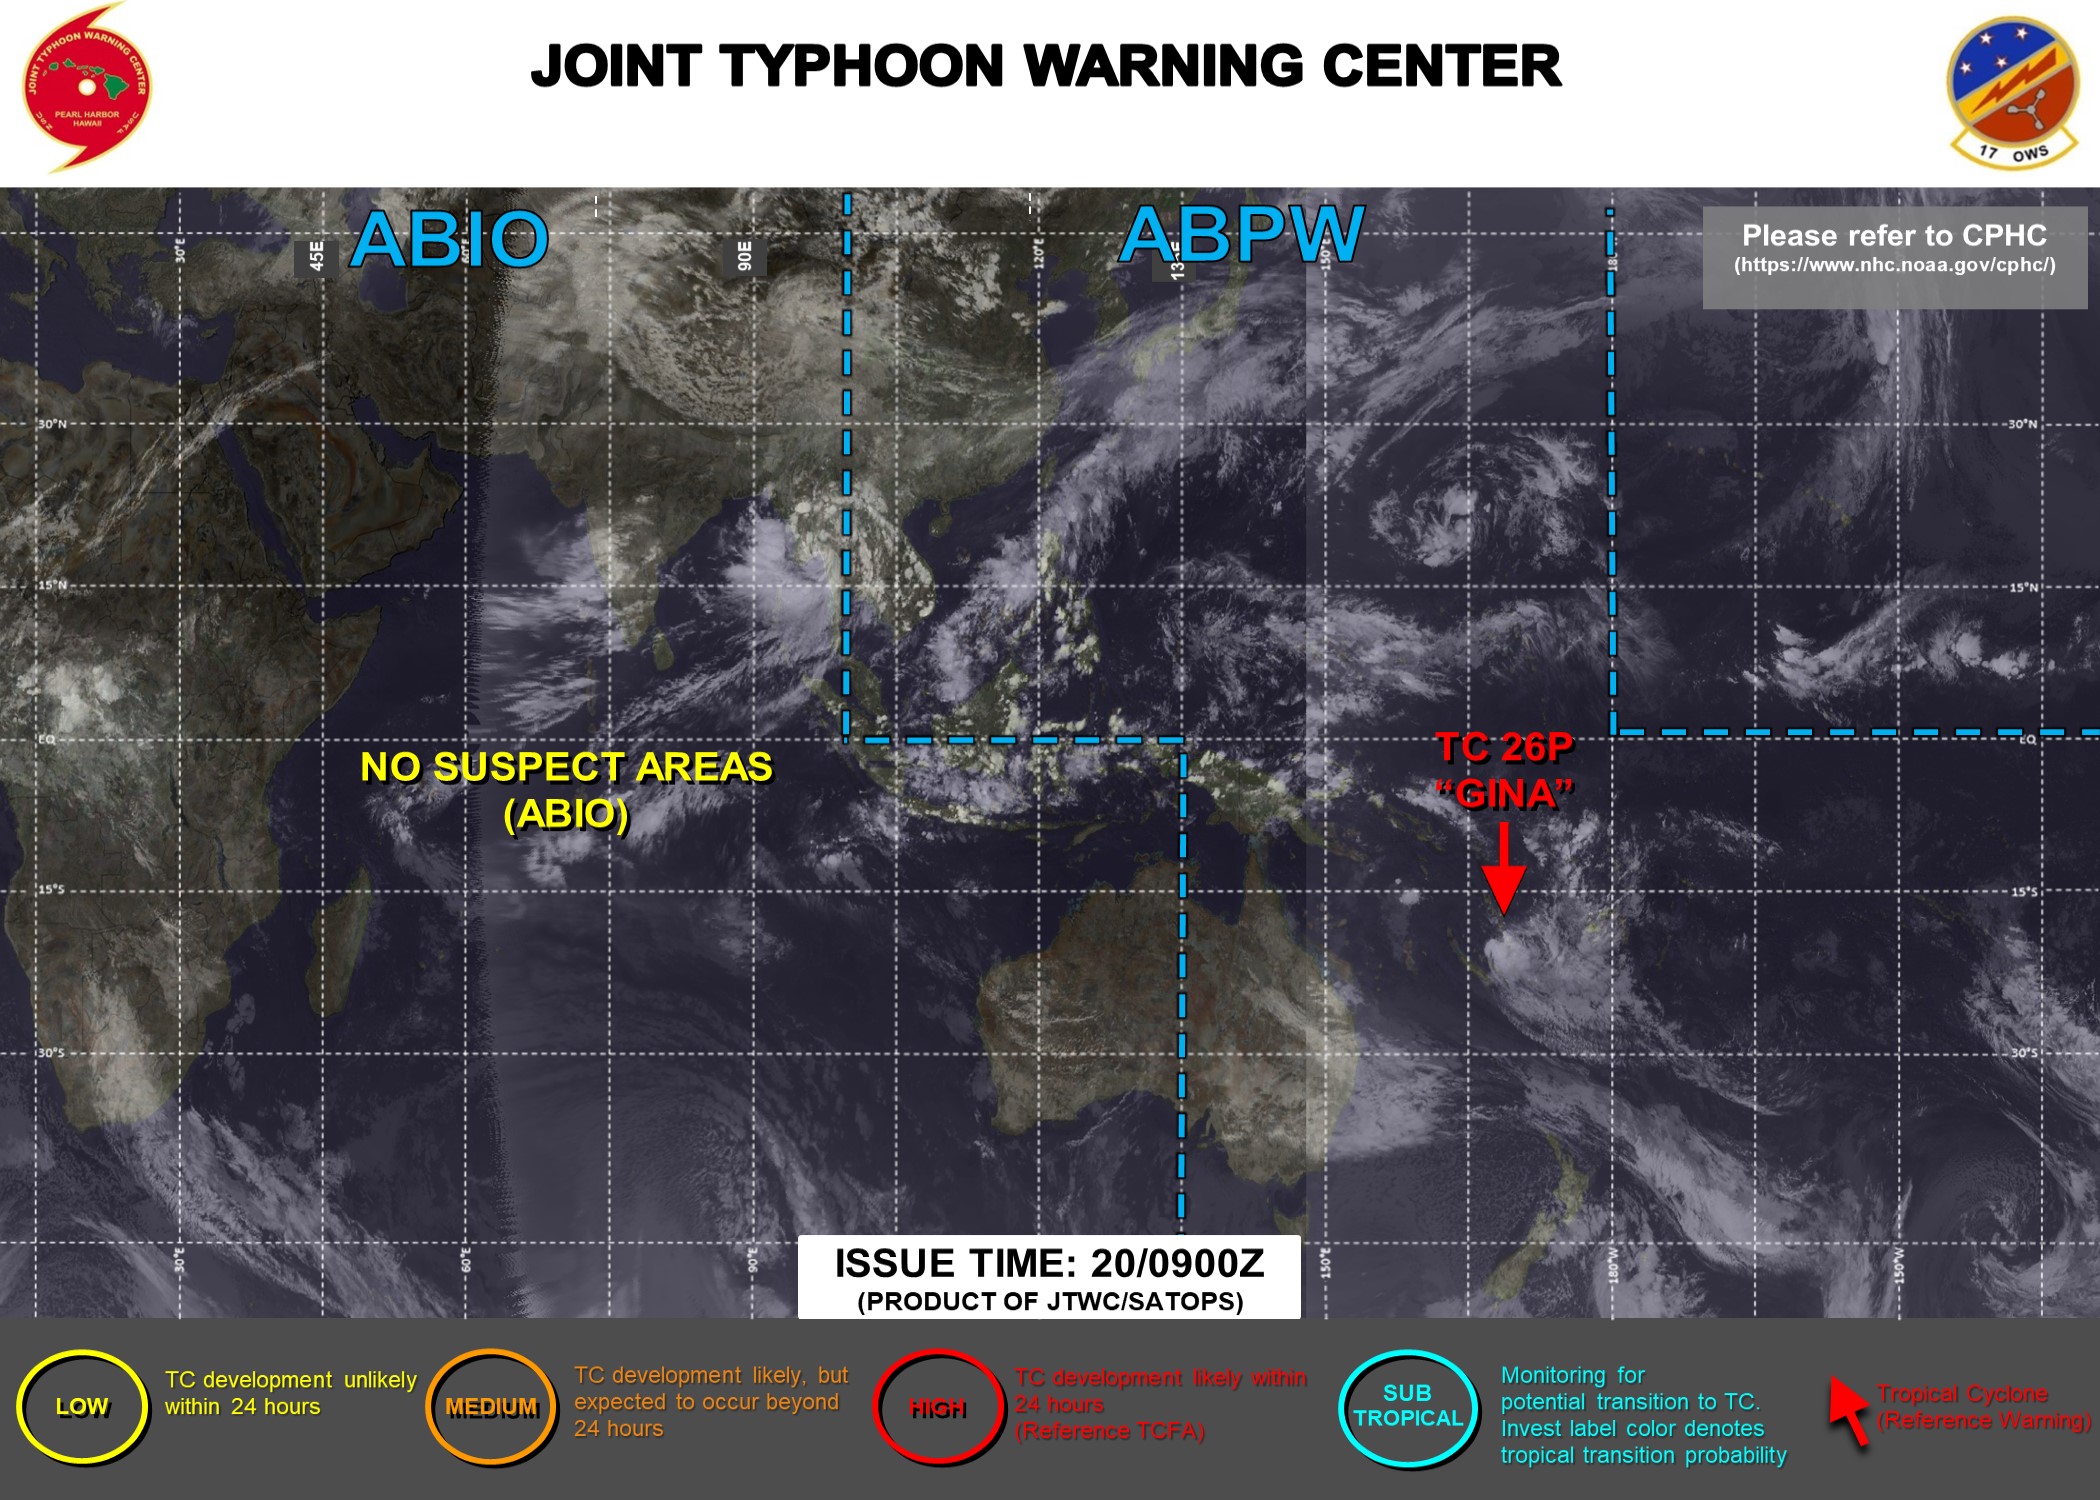 JTWC IS ISSUING 6HOURLY WARNINGS AND 3HOURLY SATELLITE BULLETINS ON TC 26P(GINA) AND 3HOURLY SATELLITE BULLETINS ON INVEST 93B.